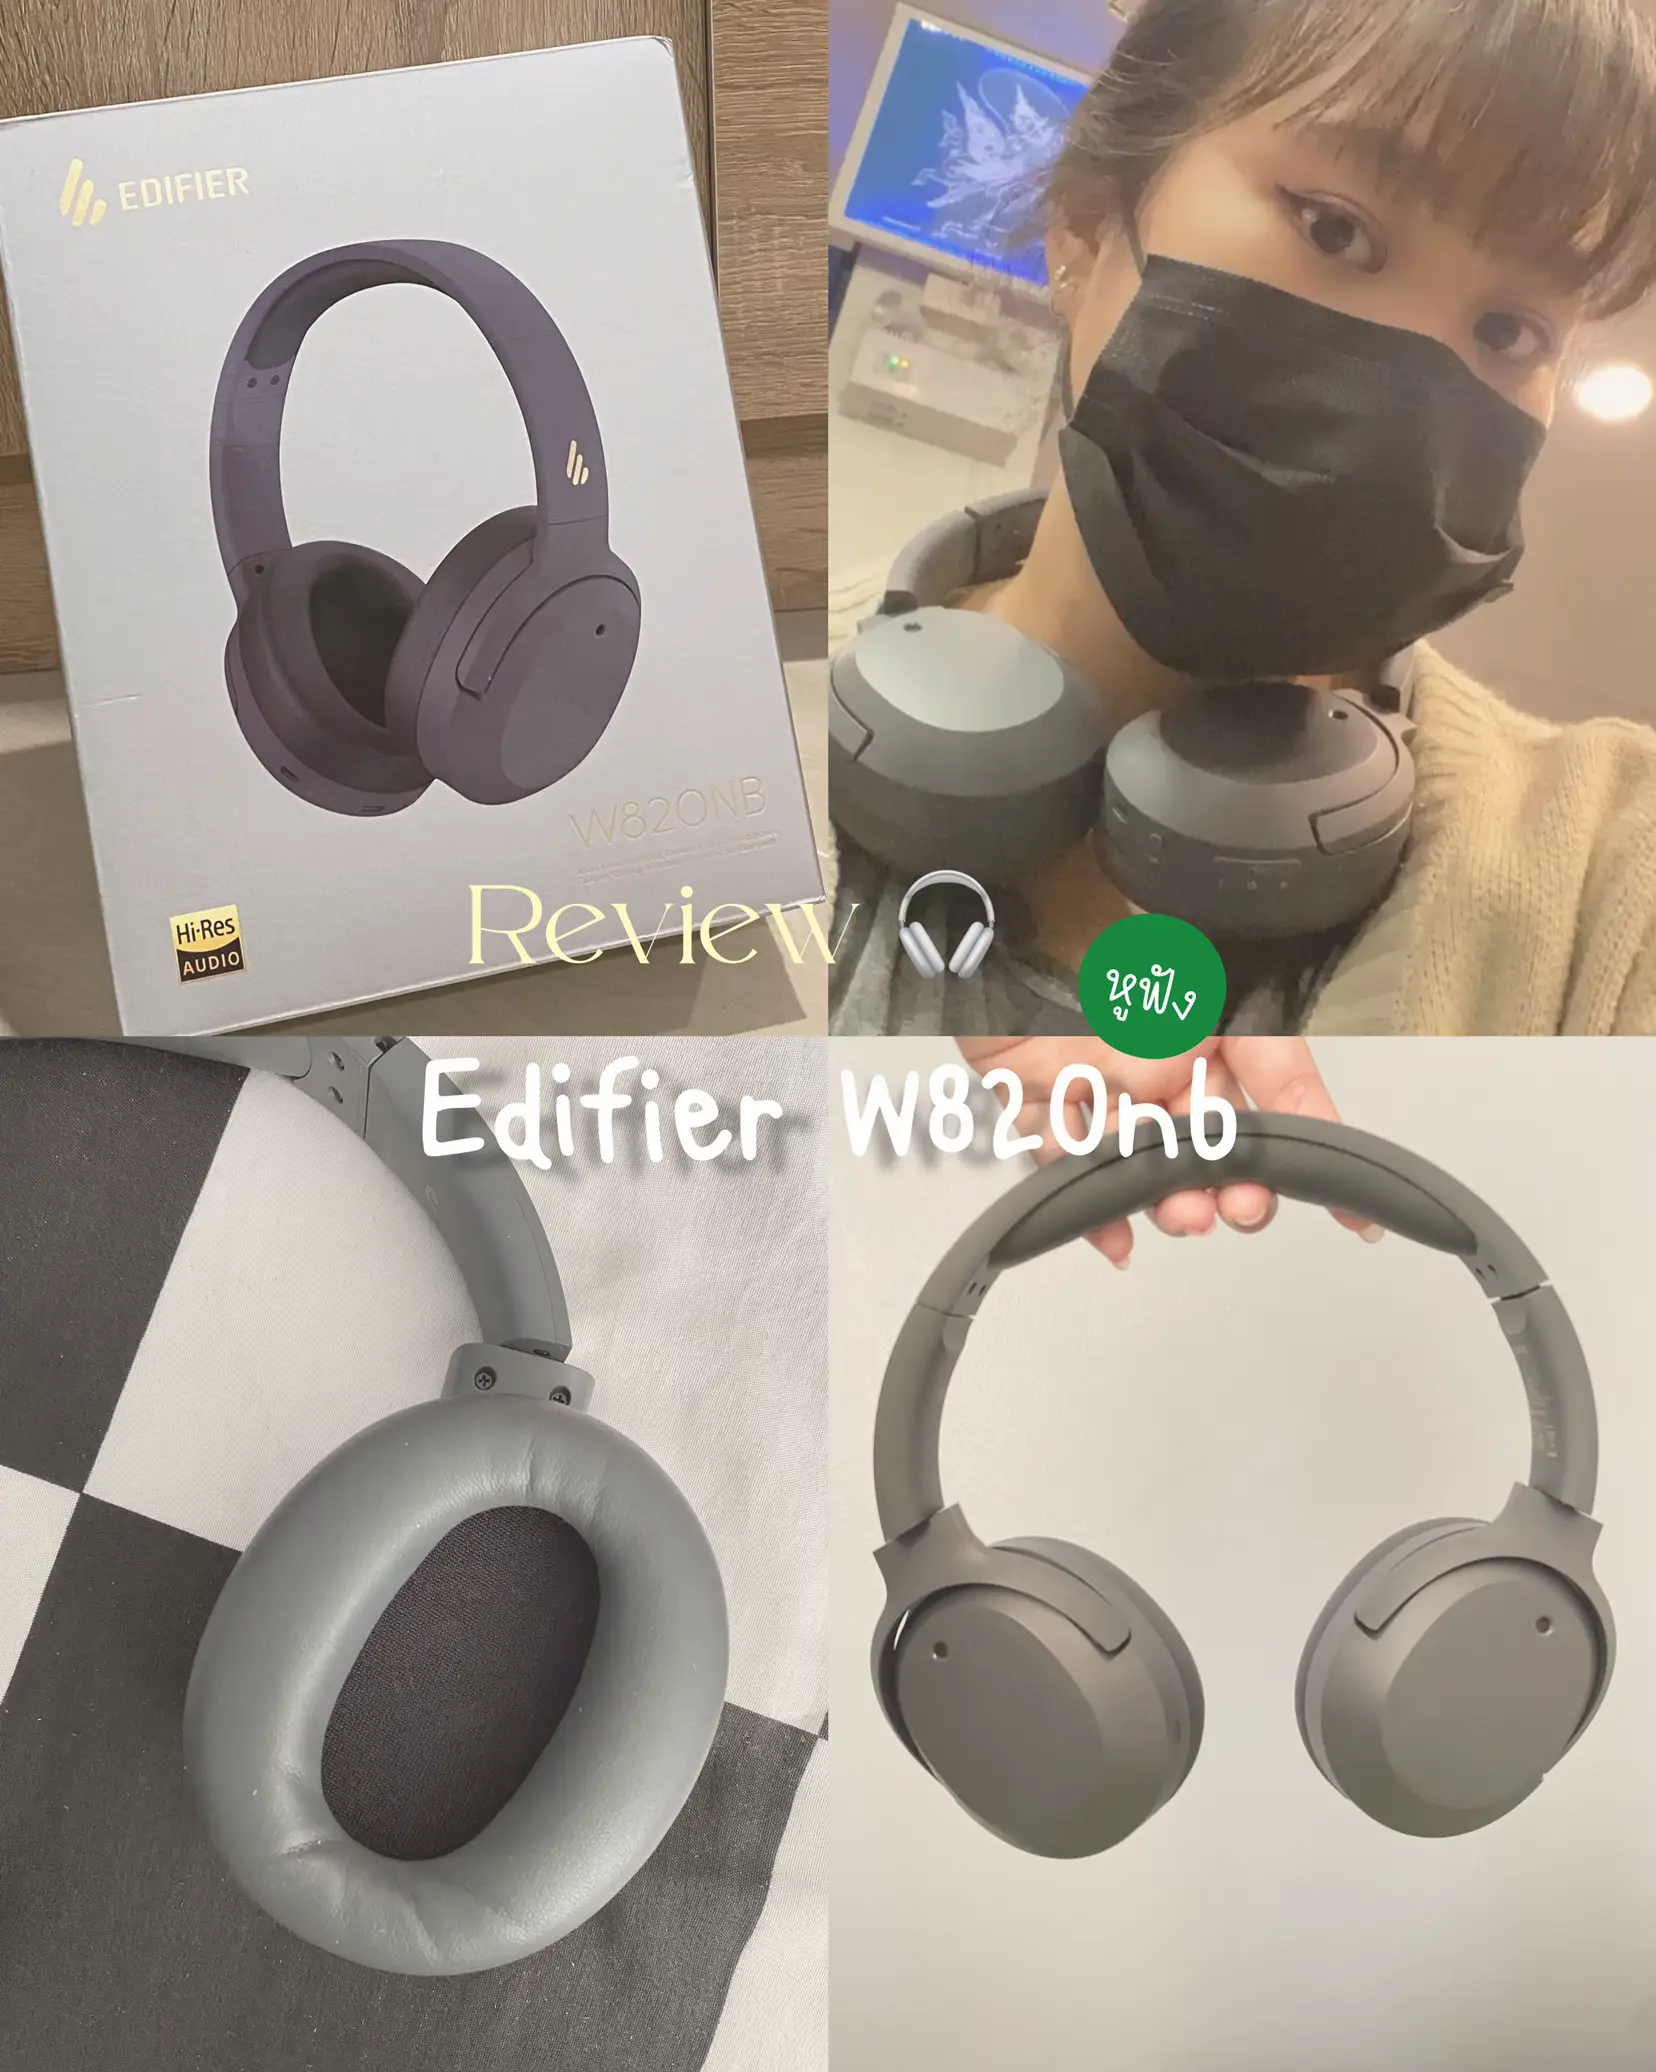 ✨ Edifier W820nb Ear Cover Headphones Review 🎧 Headphones that don't just  have a pretty design!, Gallery posted by Kanbabe